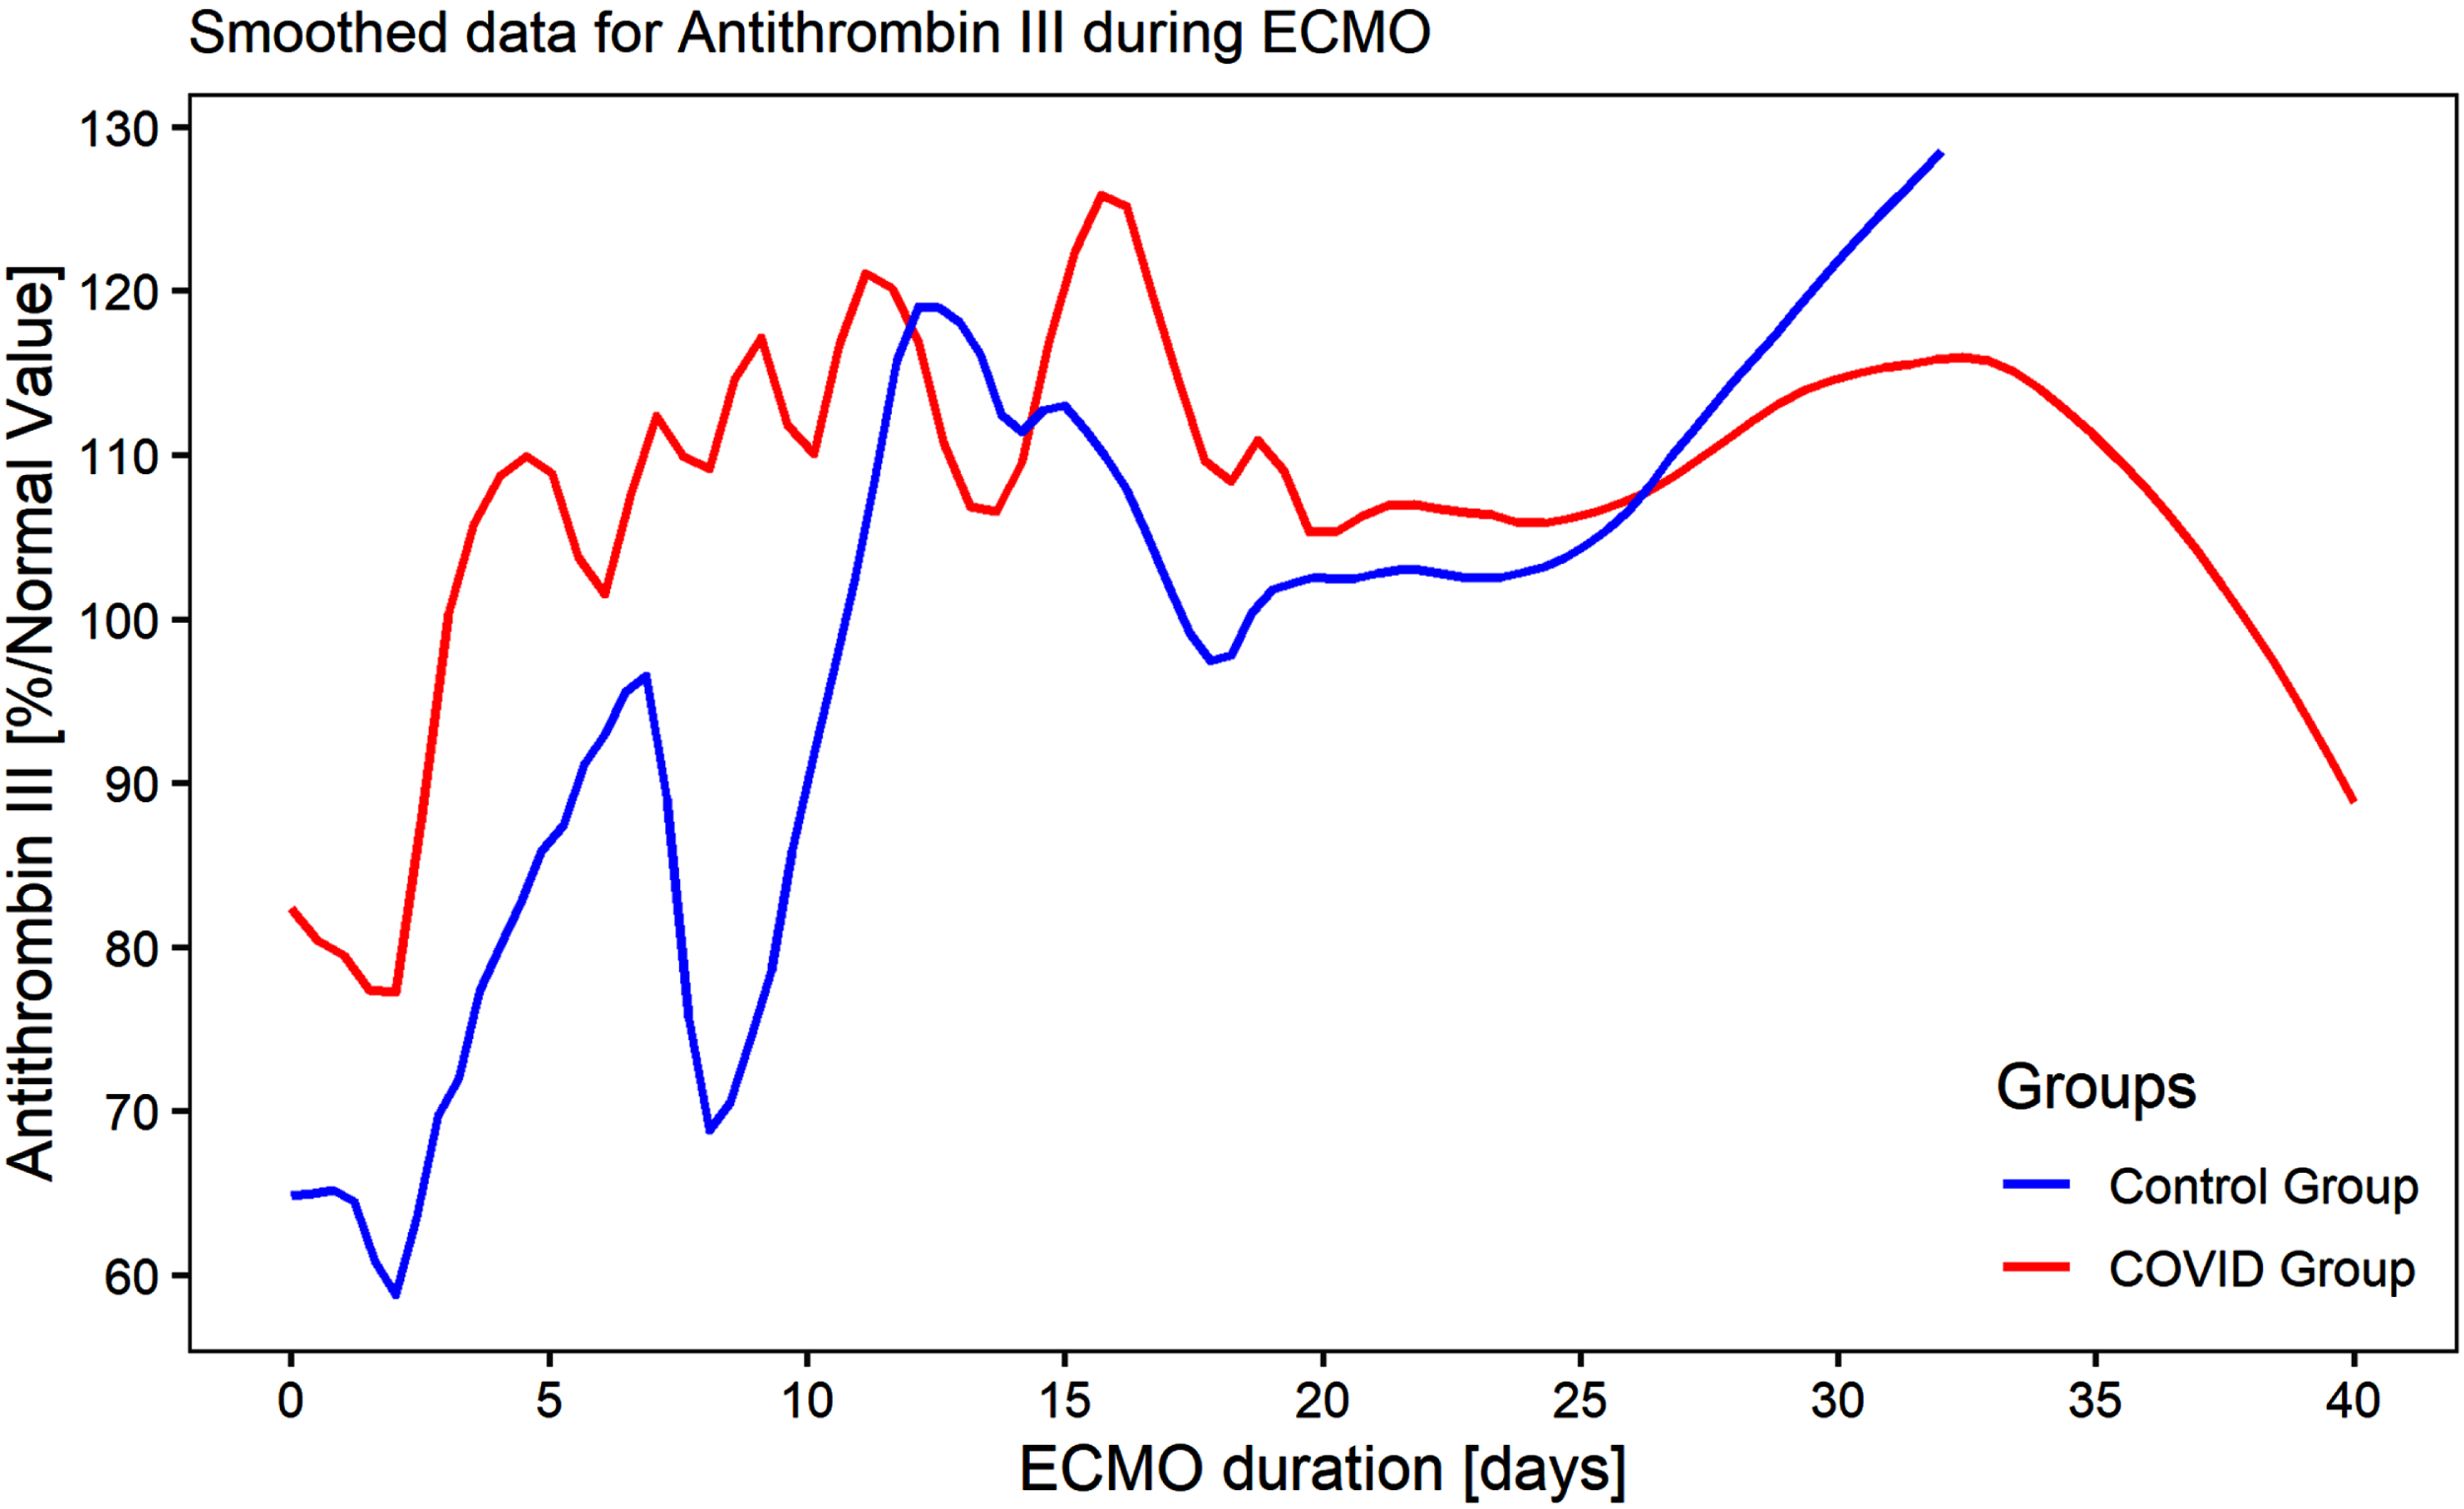 Antithrombin III levels during ECMO support.